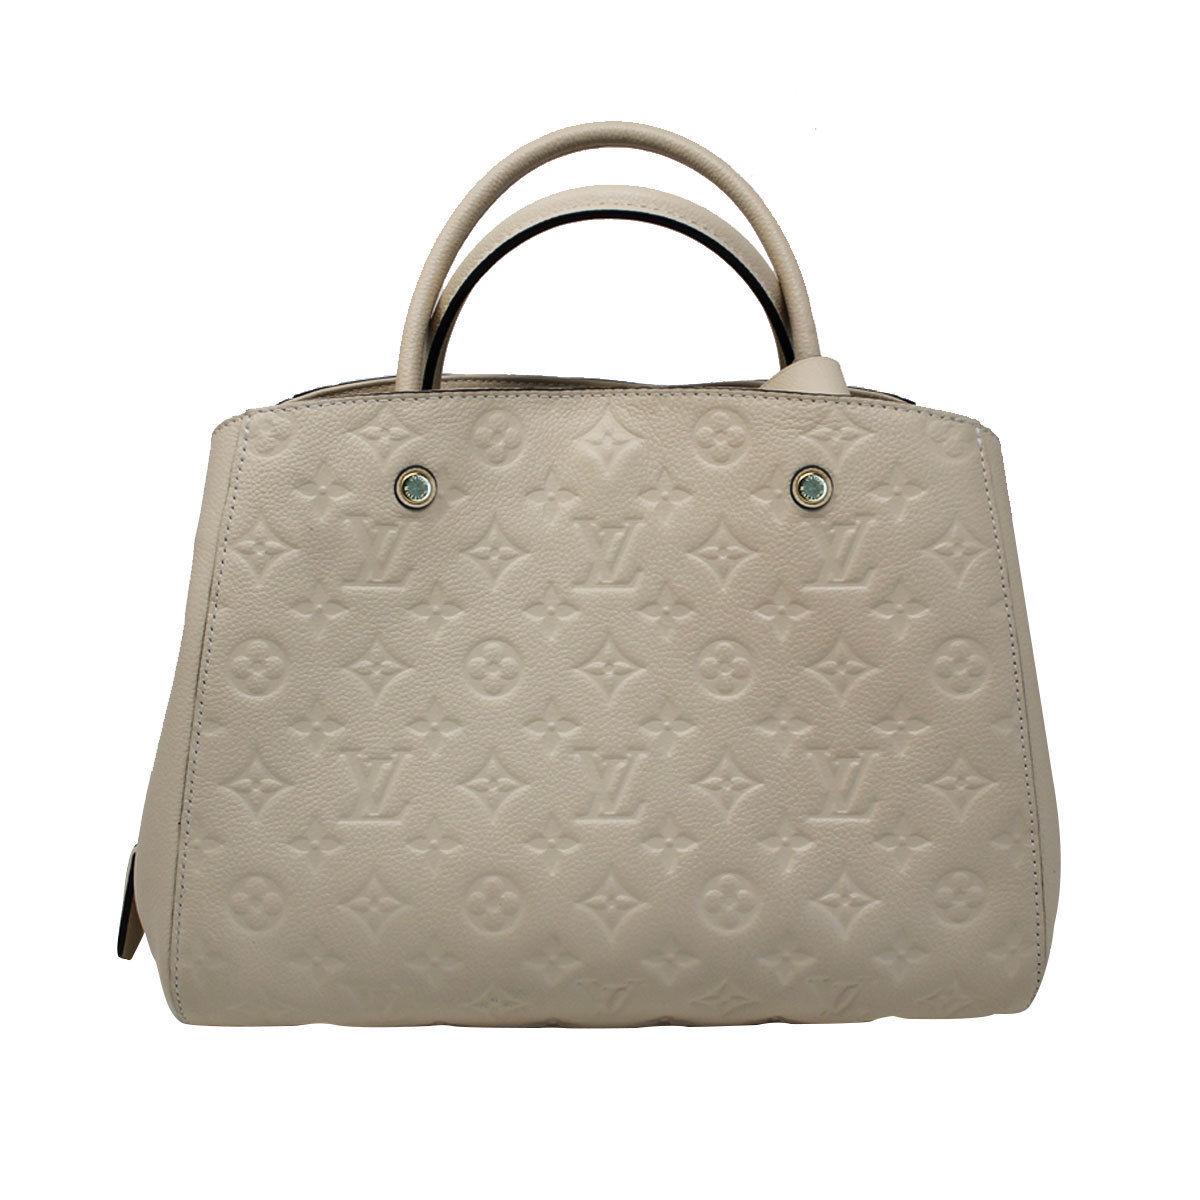 Company: Louis Vuitton
Handles: Leather rolled handles with 4.5″ drop or 10″ drop removable shoulder strap
Measurements: 14″ x 4.5″ x 9.5″
Materials: Neige Empreinte Leather 
Interior: Beige & Black Striped Interior Lining includes Clochette, 2 main